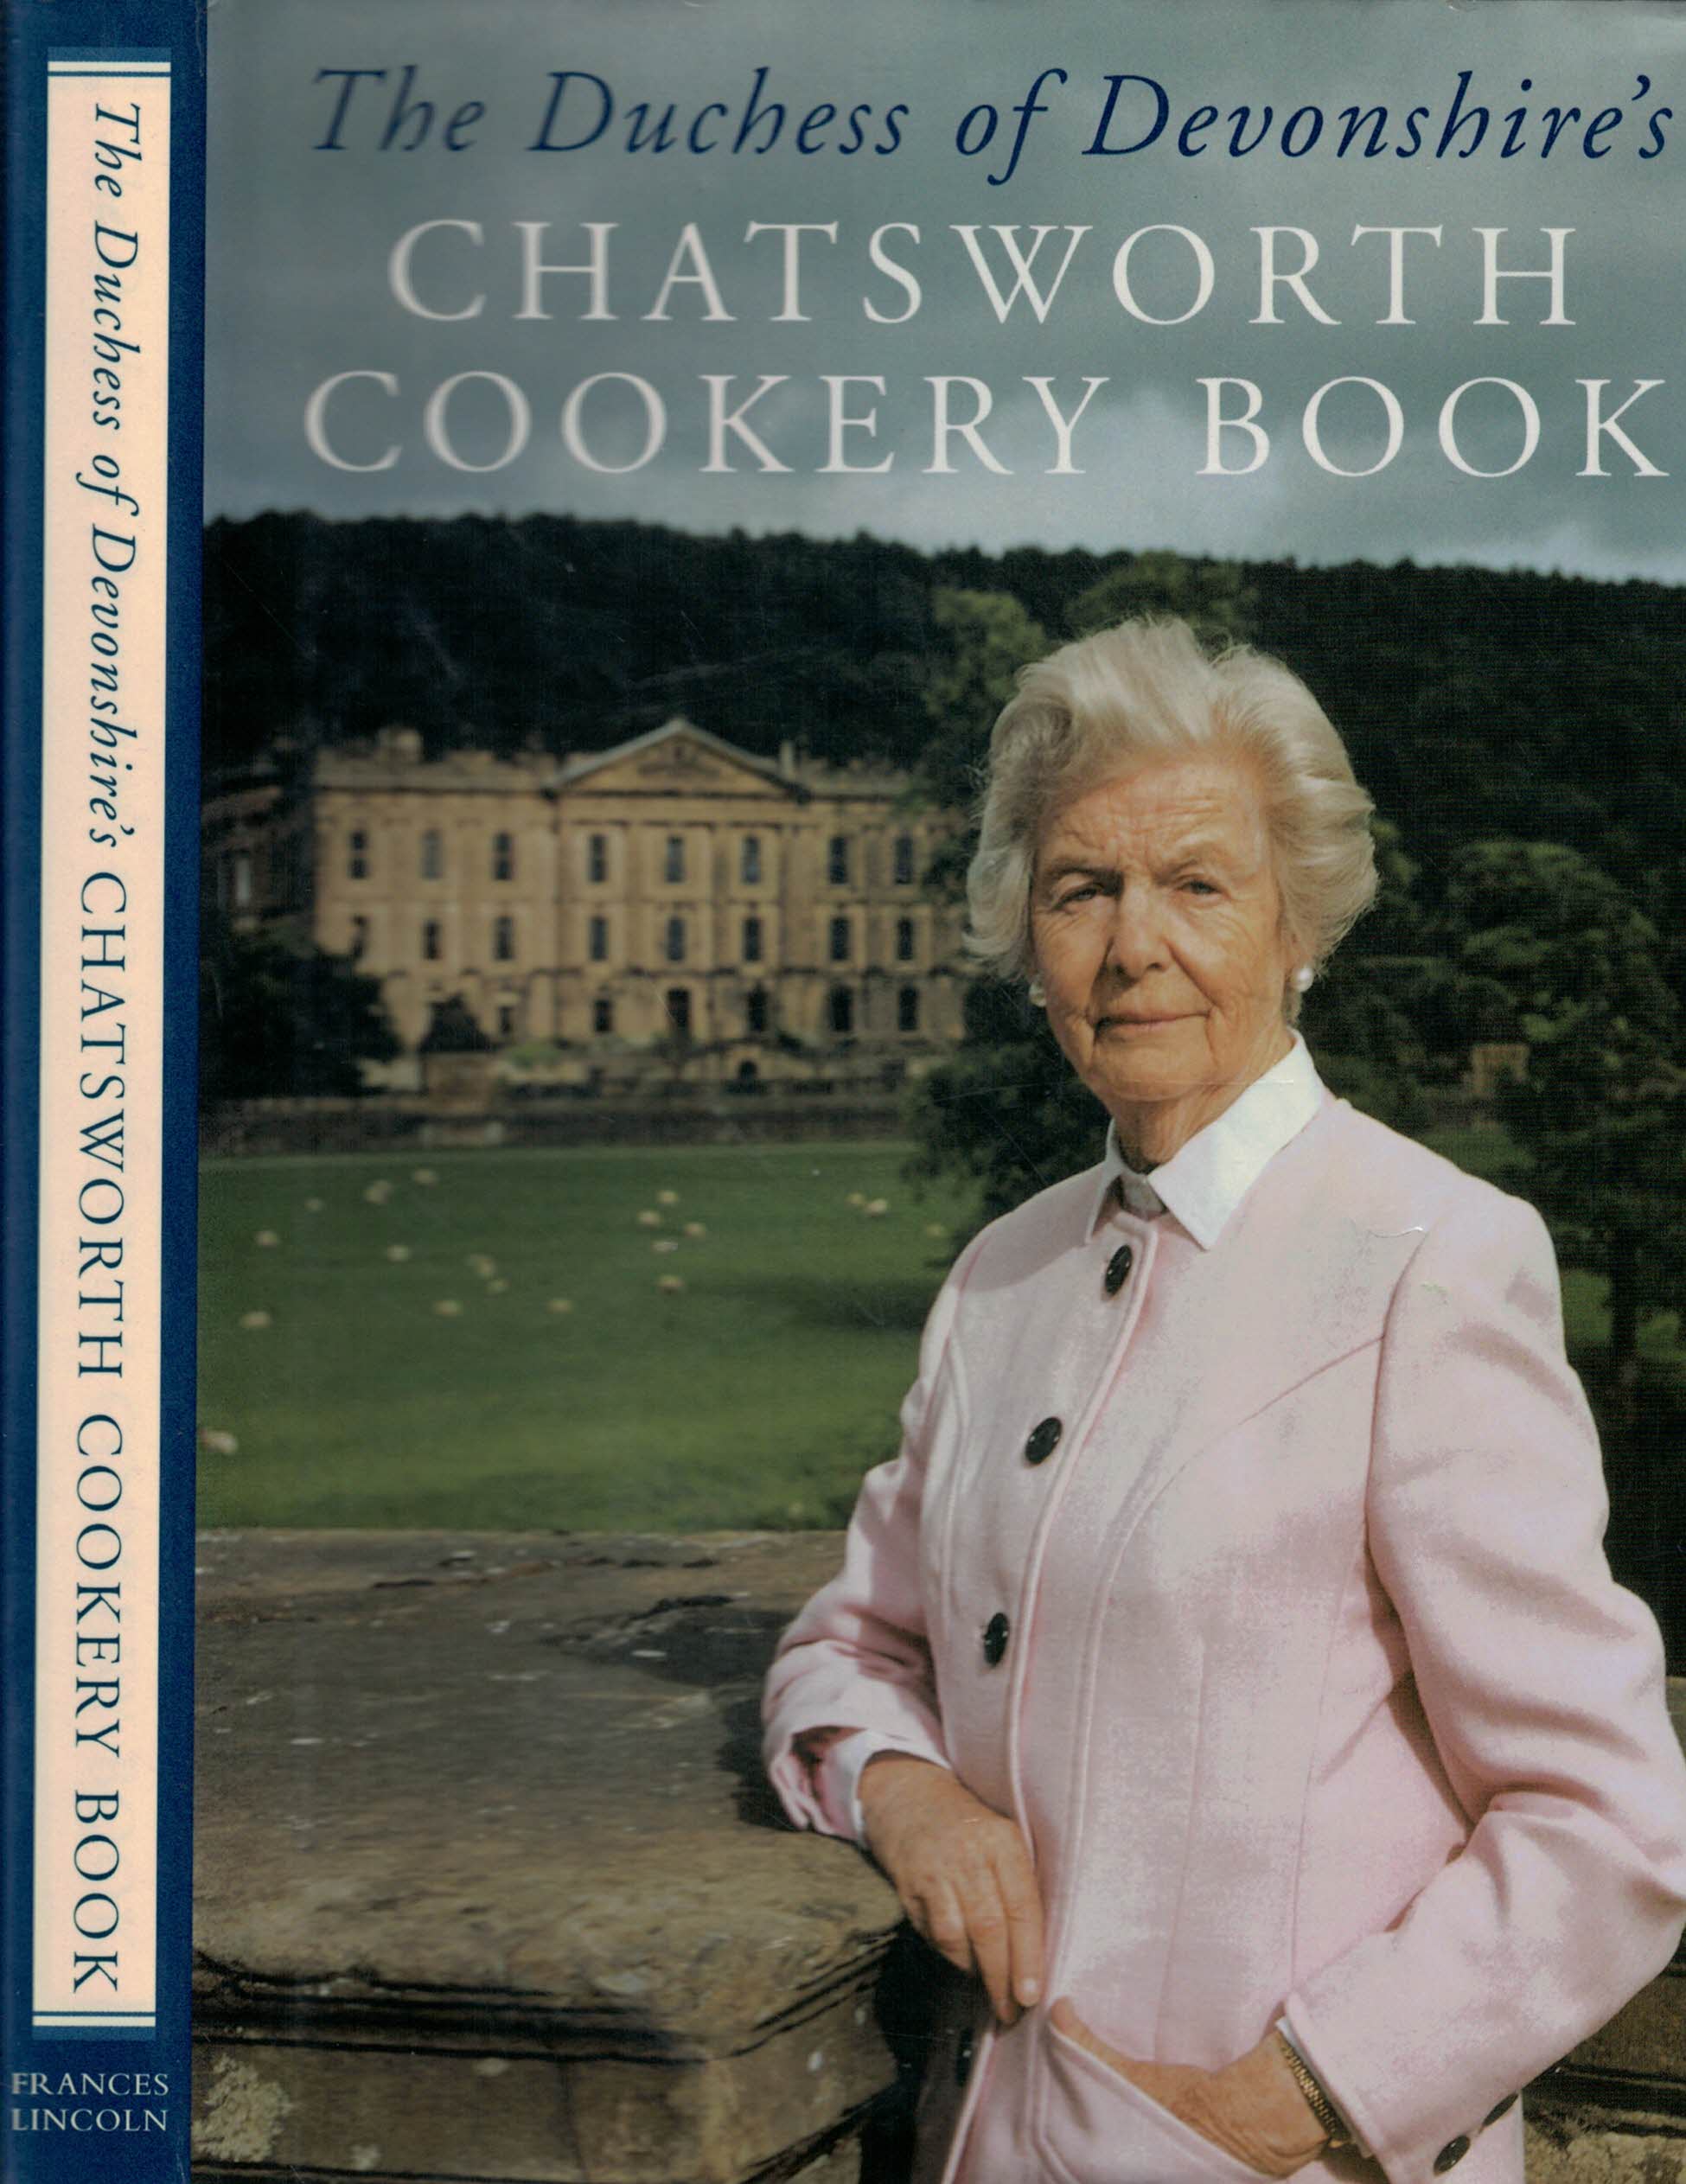 Chatsworth Cookery Book. Signed copy.